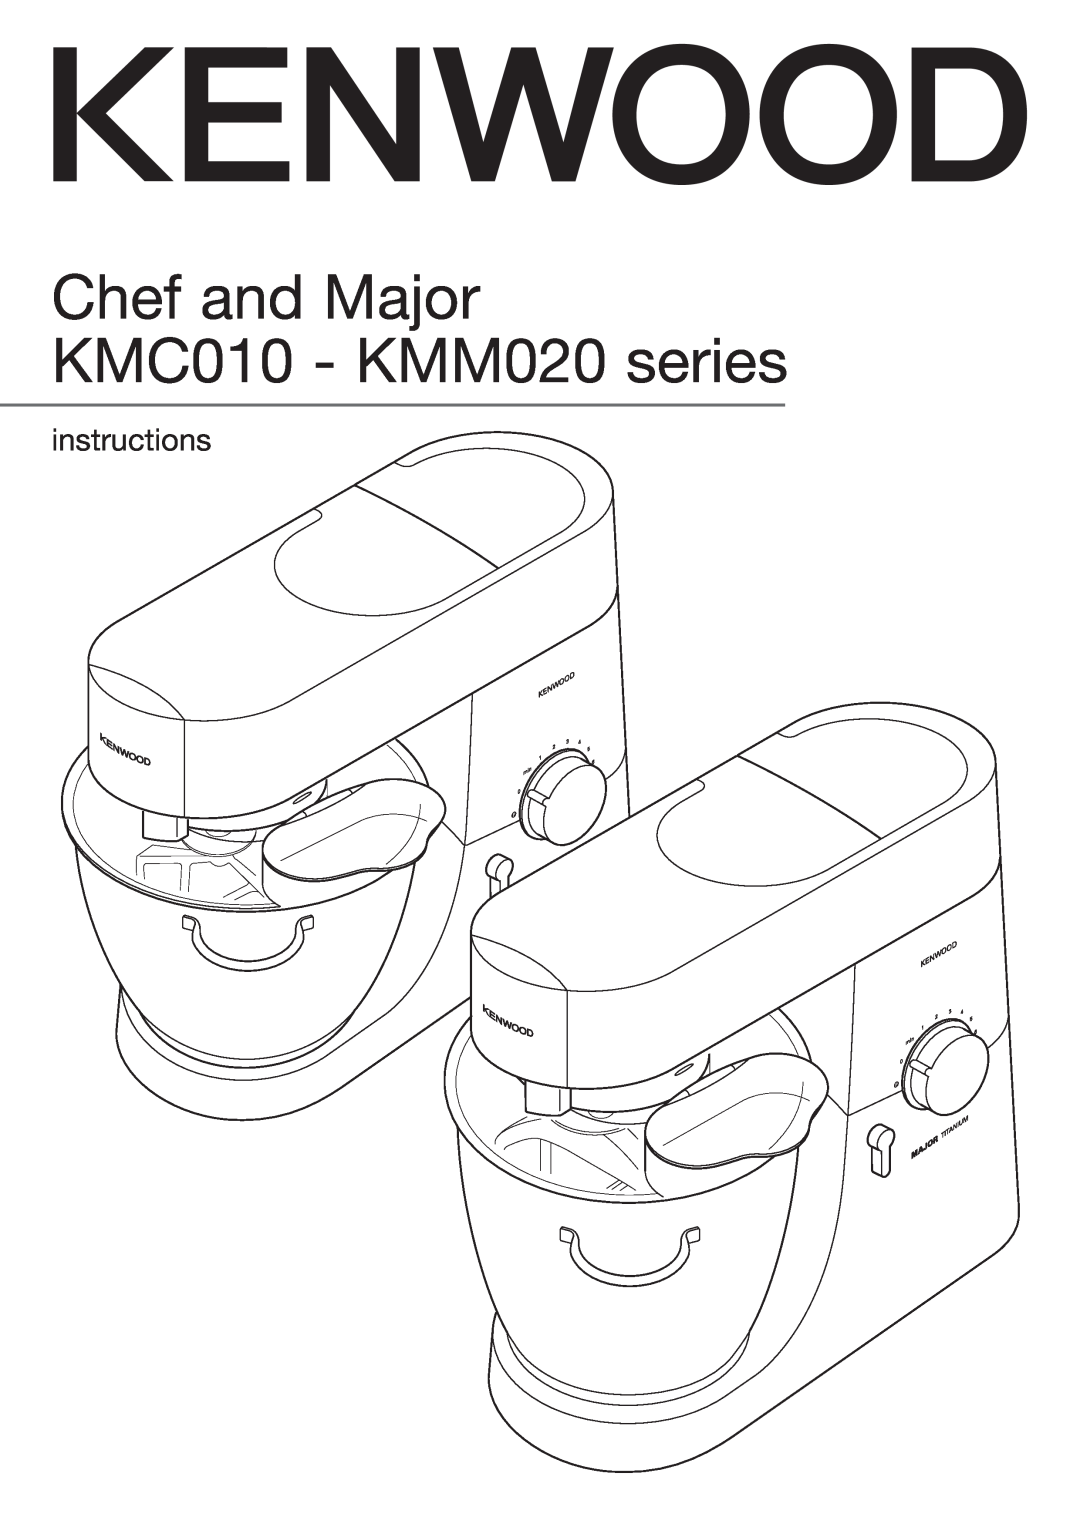 Kenwood manual Chef and Major KMC010 - KMM020 series, instructions 